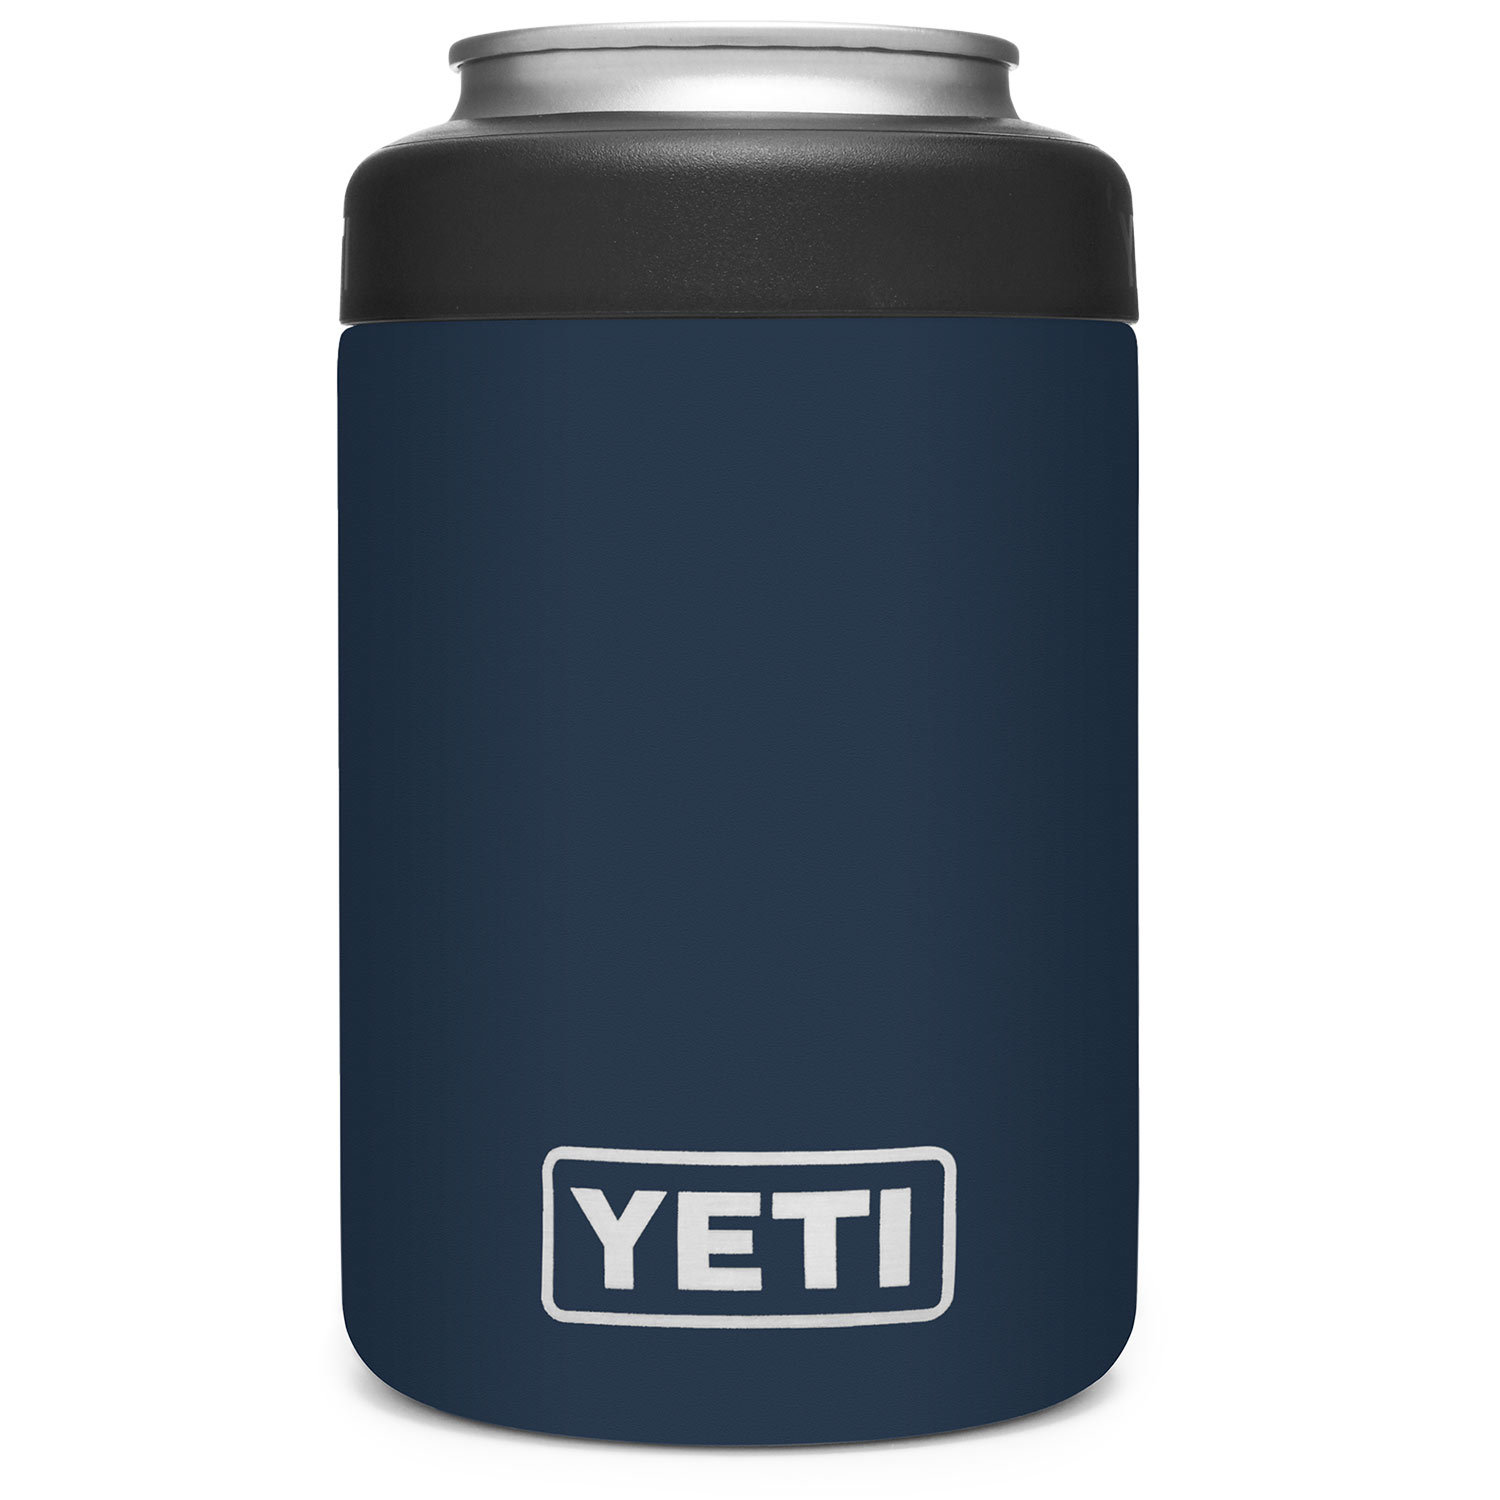 Yeti Rambler Colster 16oz 2.0 Adapter to Fit 355ml / 12oz and